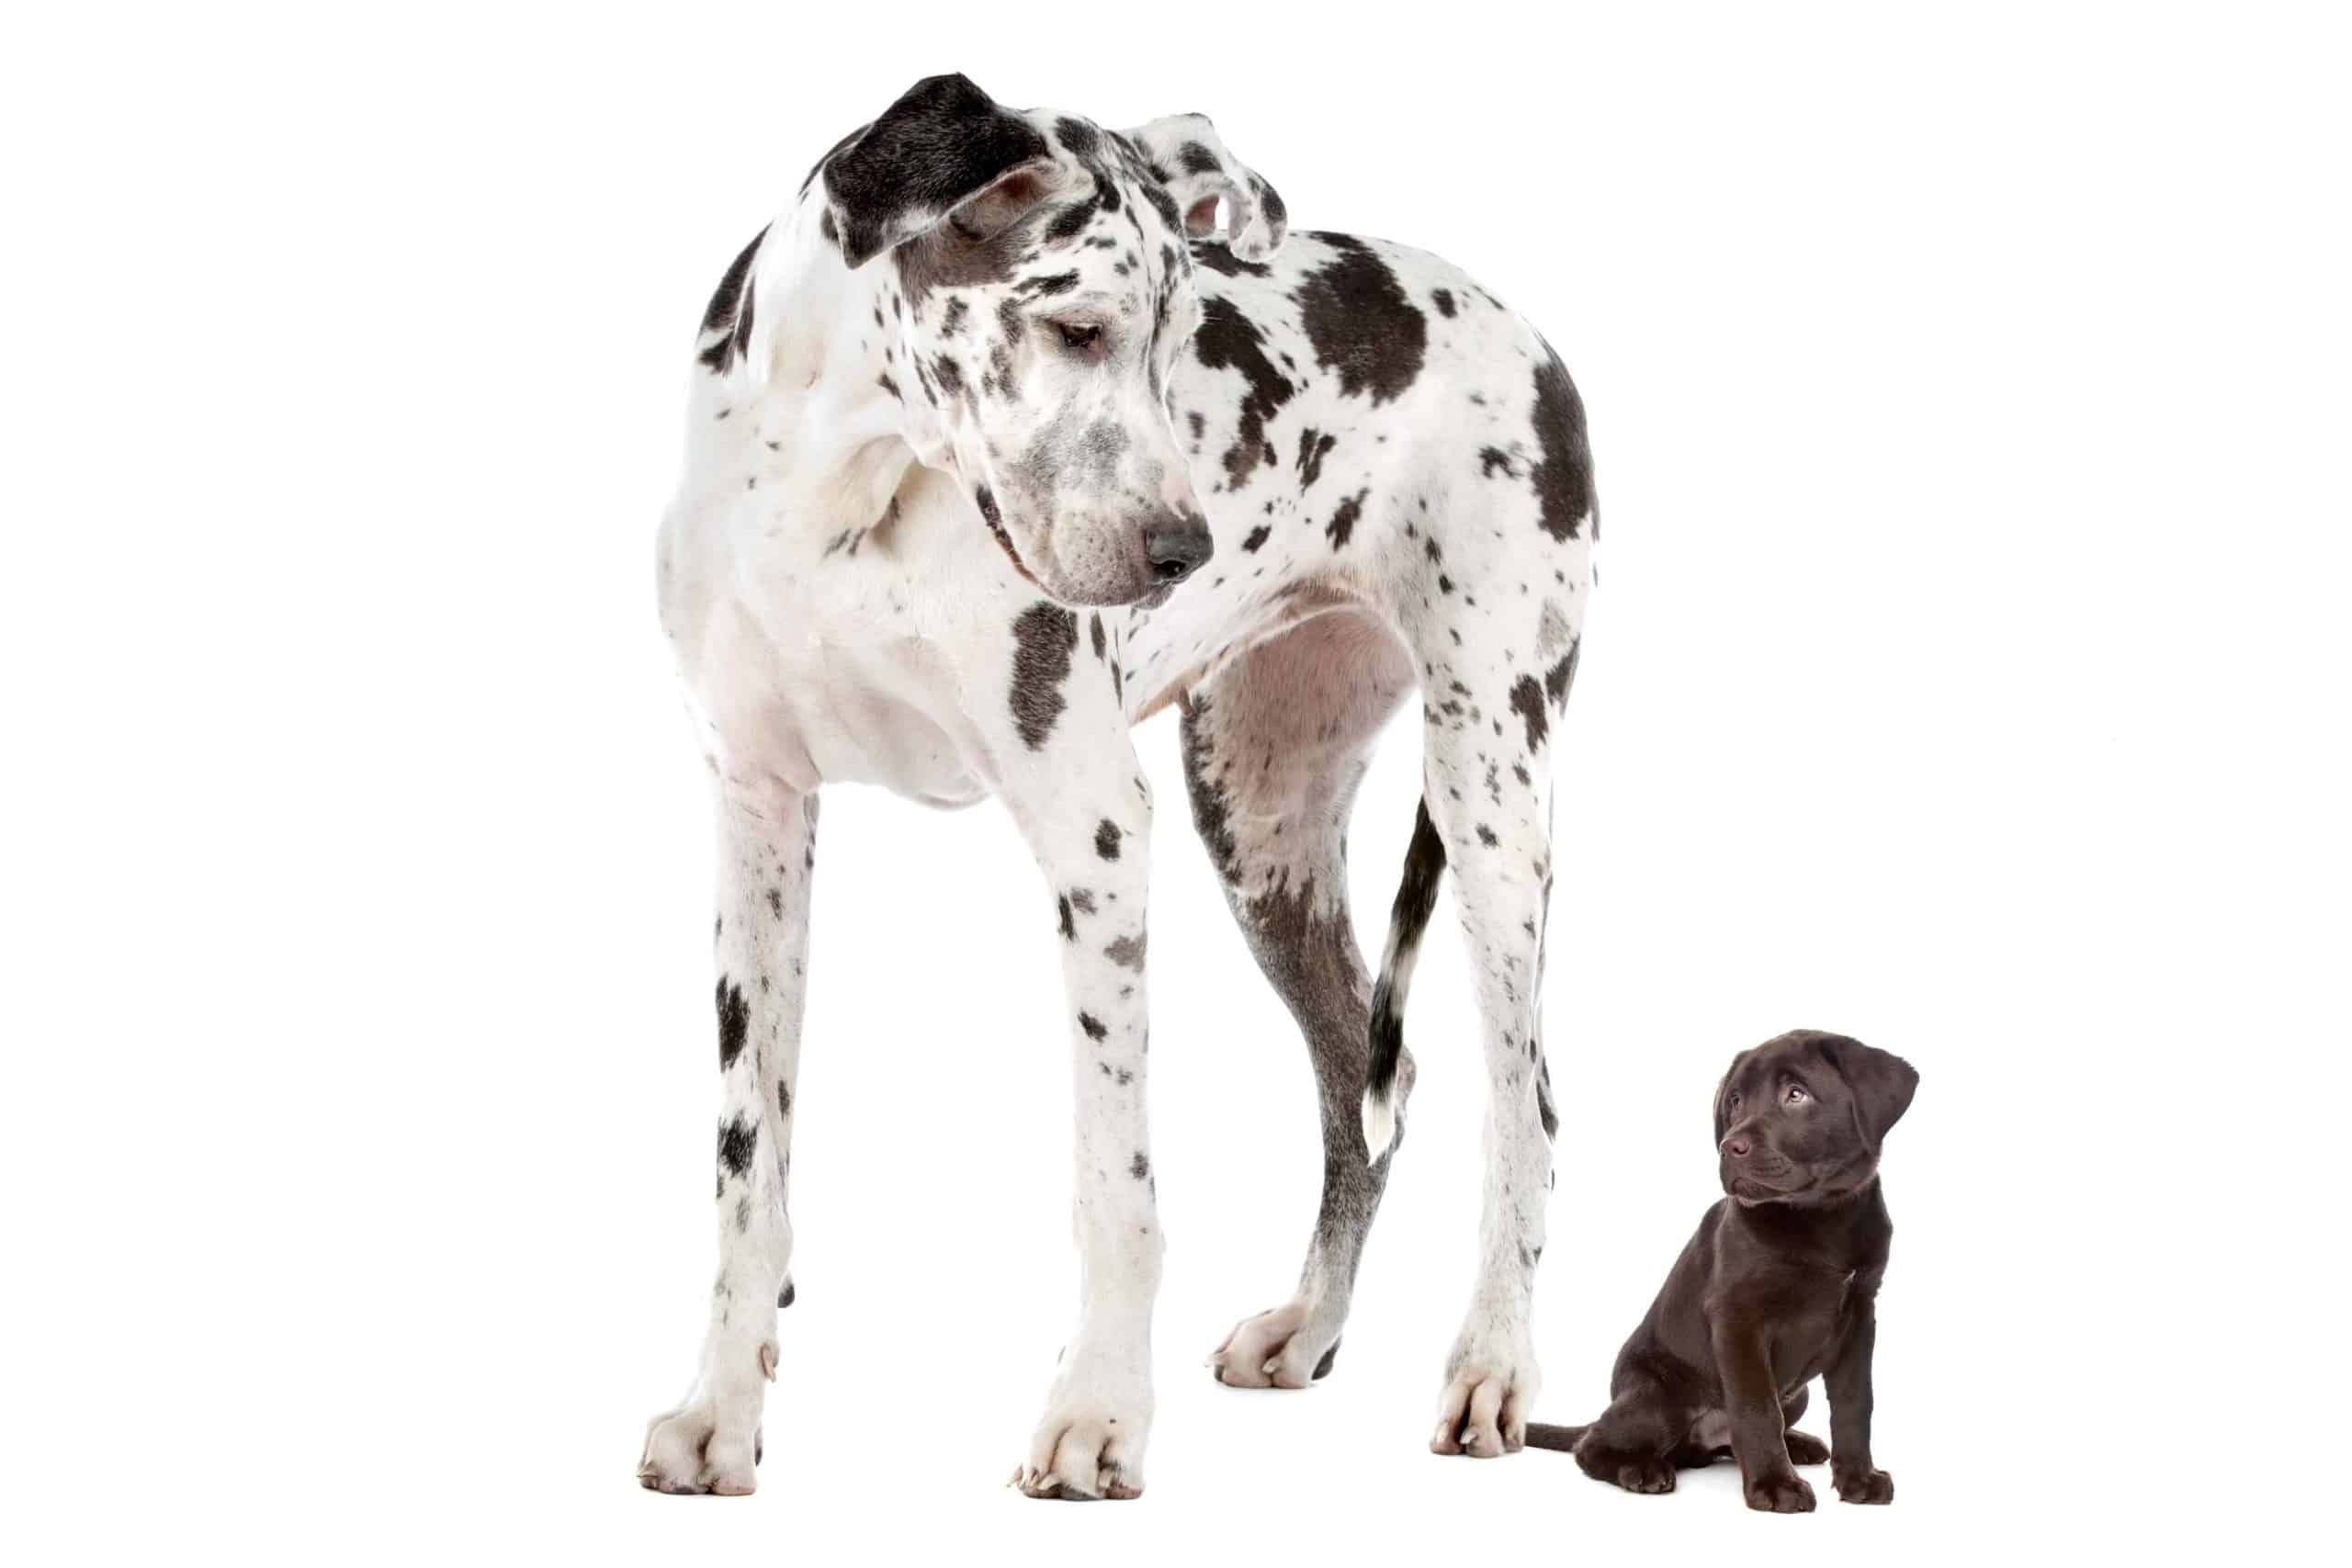 Great Dane stands next to chocolate Labrador retriever puppy. Understanding your dog's age, activity level, and whether it has been spayed or neutered helps you determine its daily calorie requirements. 